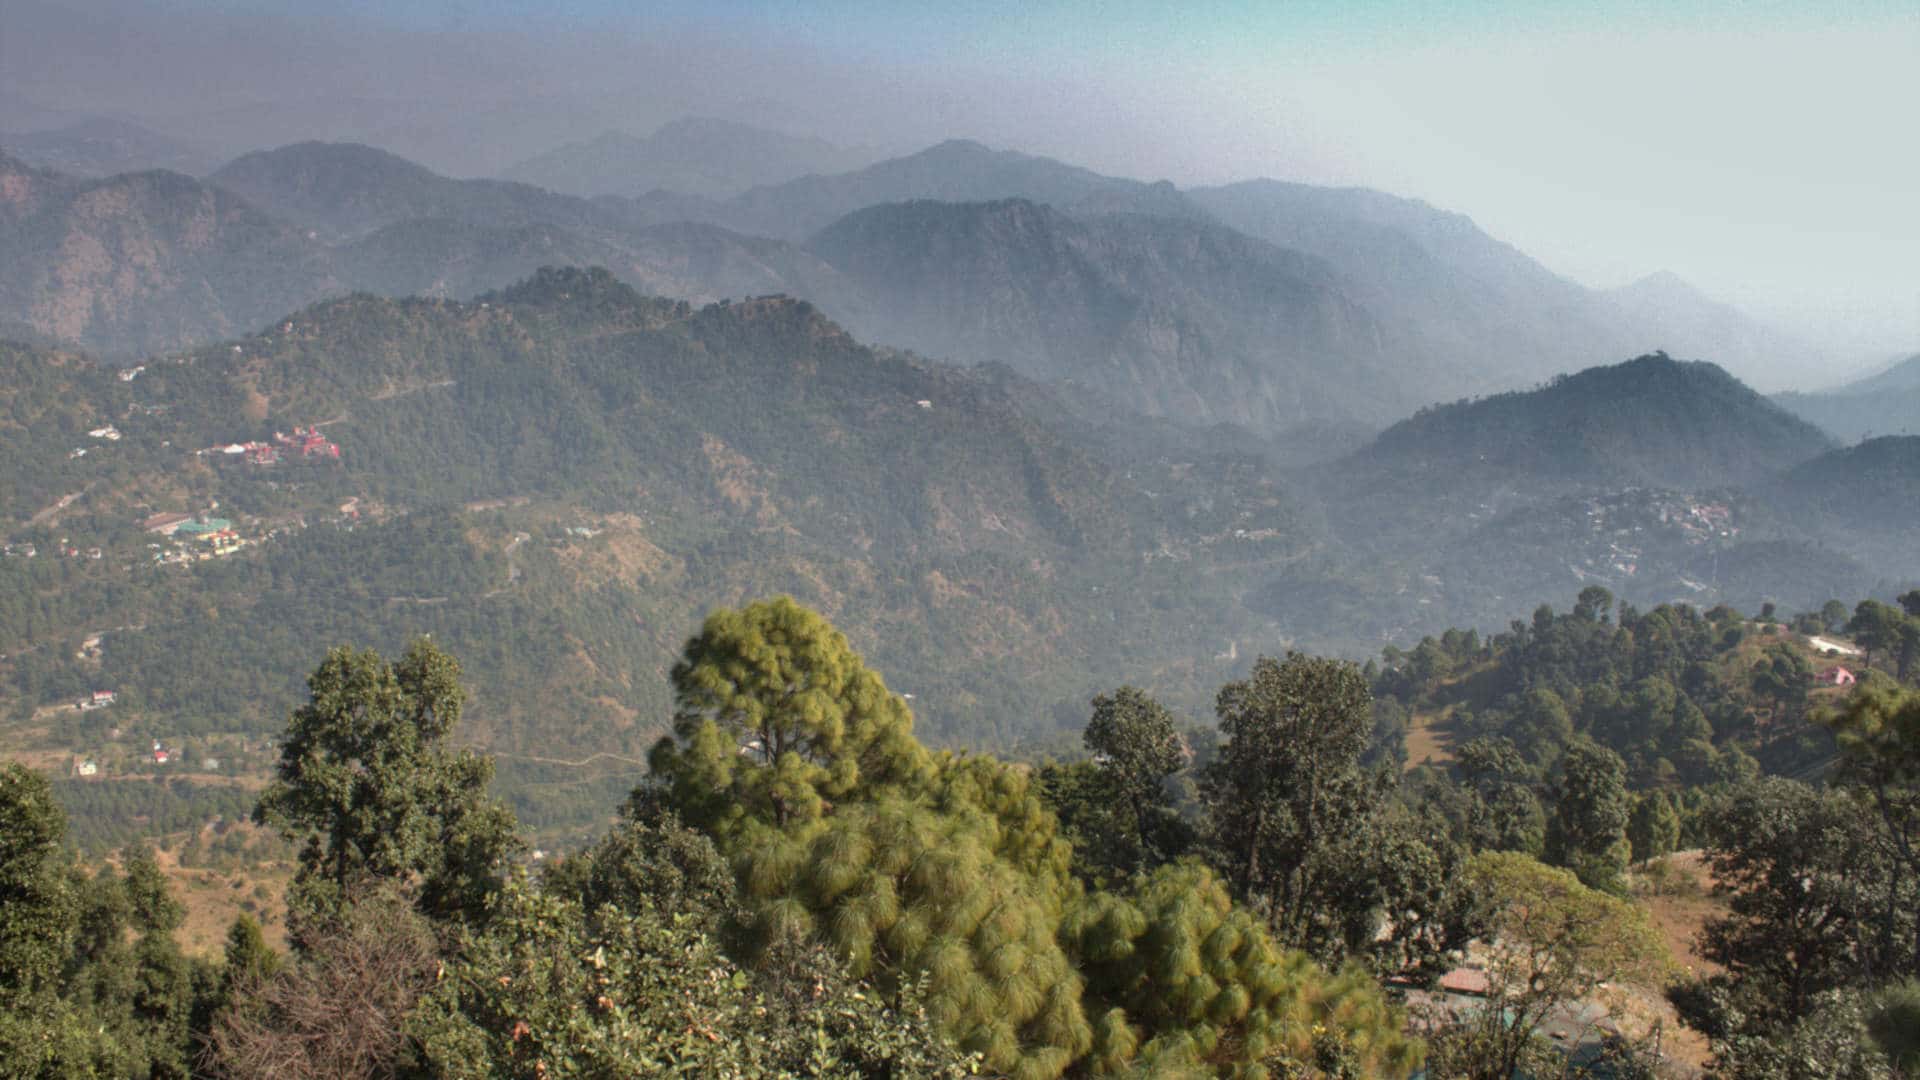 The view from the ARIES, a climate laboratory that is perched precariously close to a number of disputed international boundaries along the Himalayan mountain range.